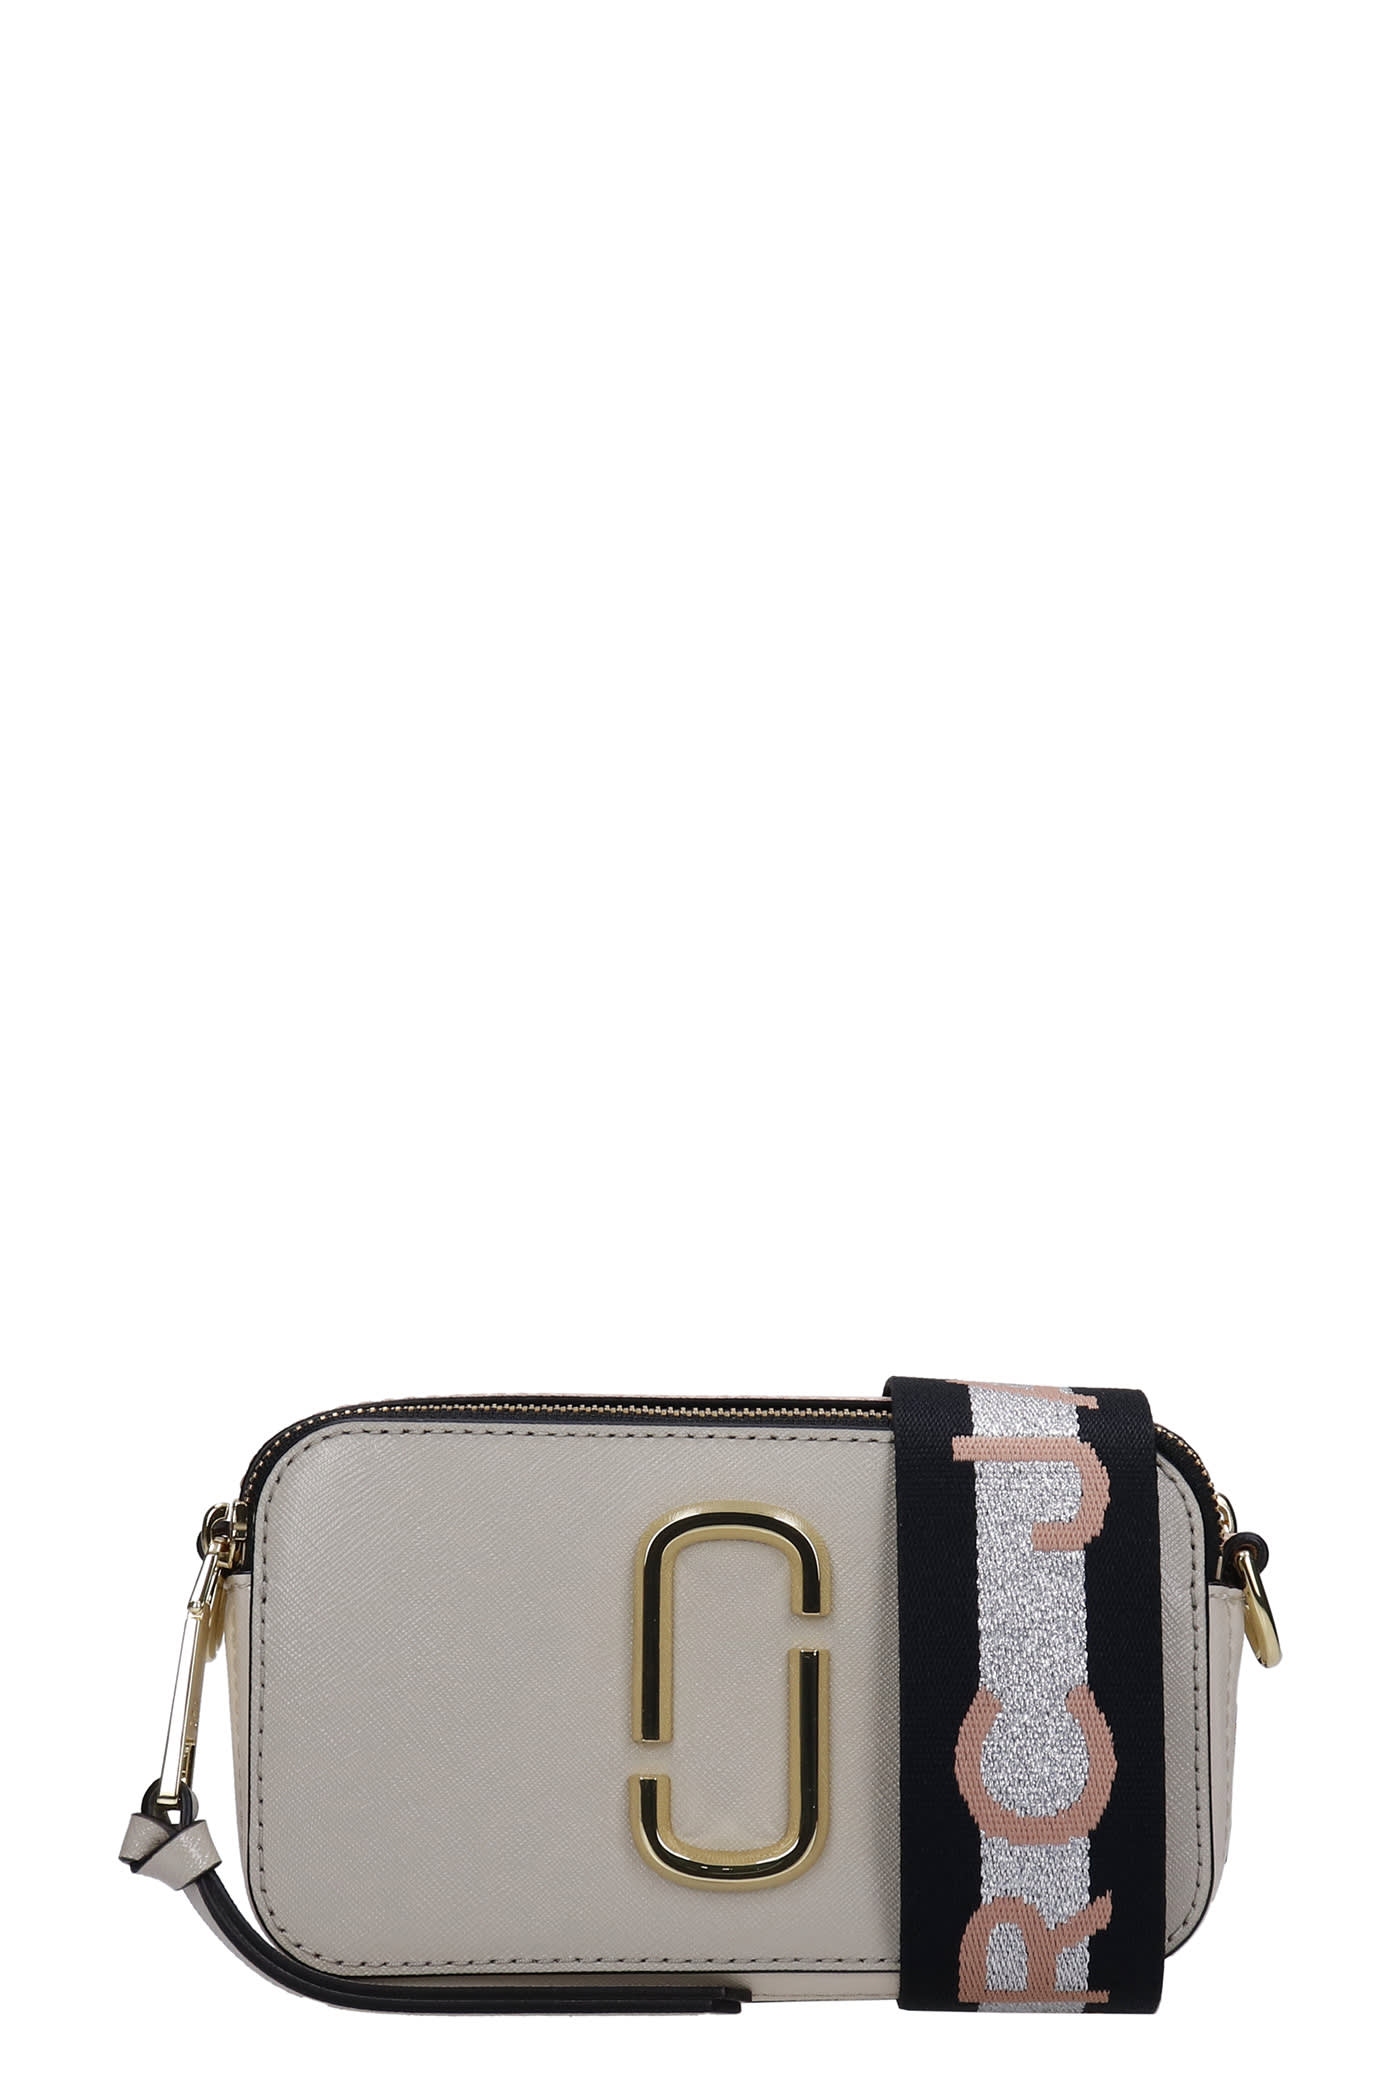 Marc Jacobs Snapshot Shoulder Bag In Taupe Leather